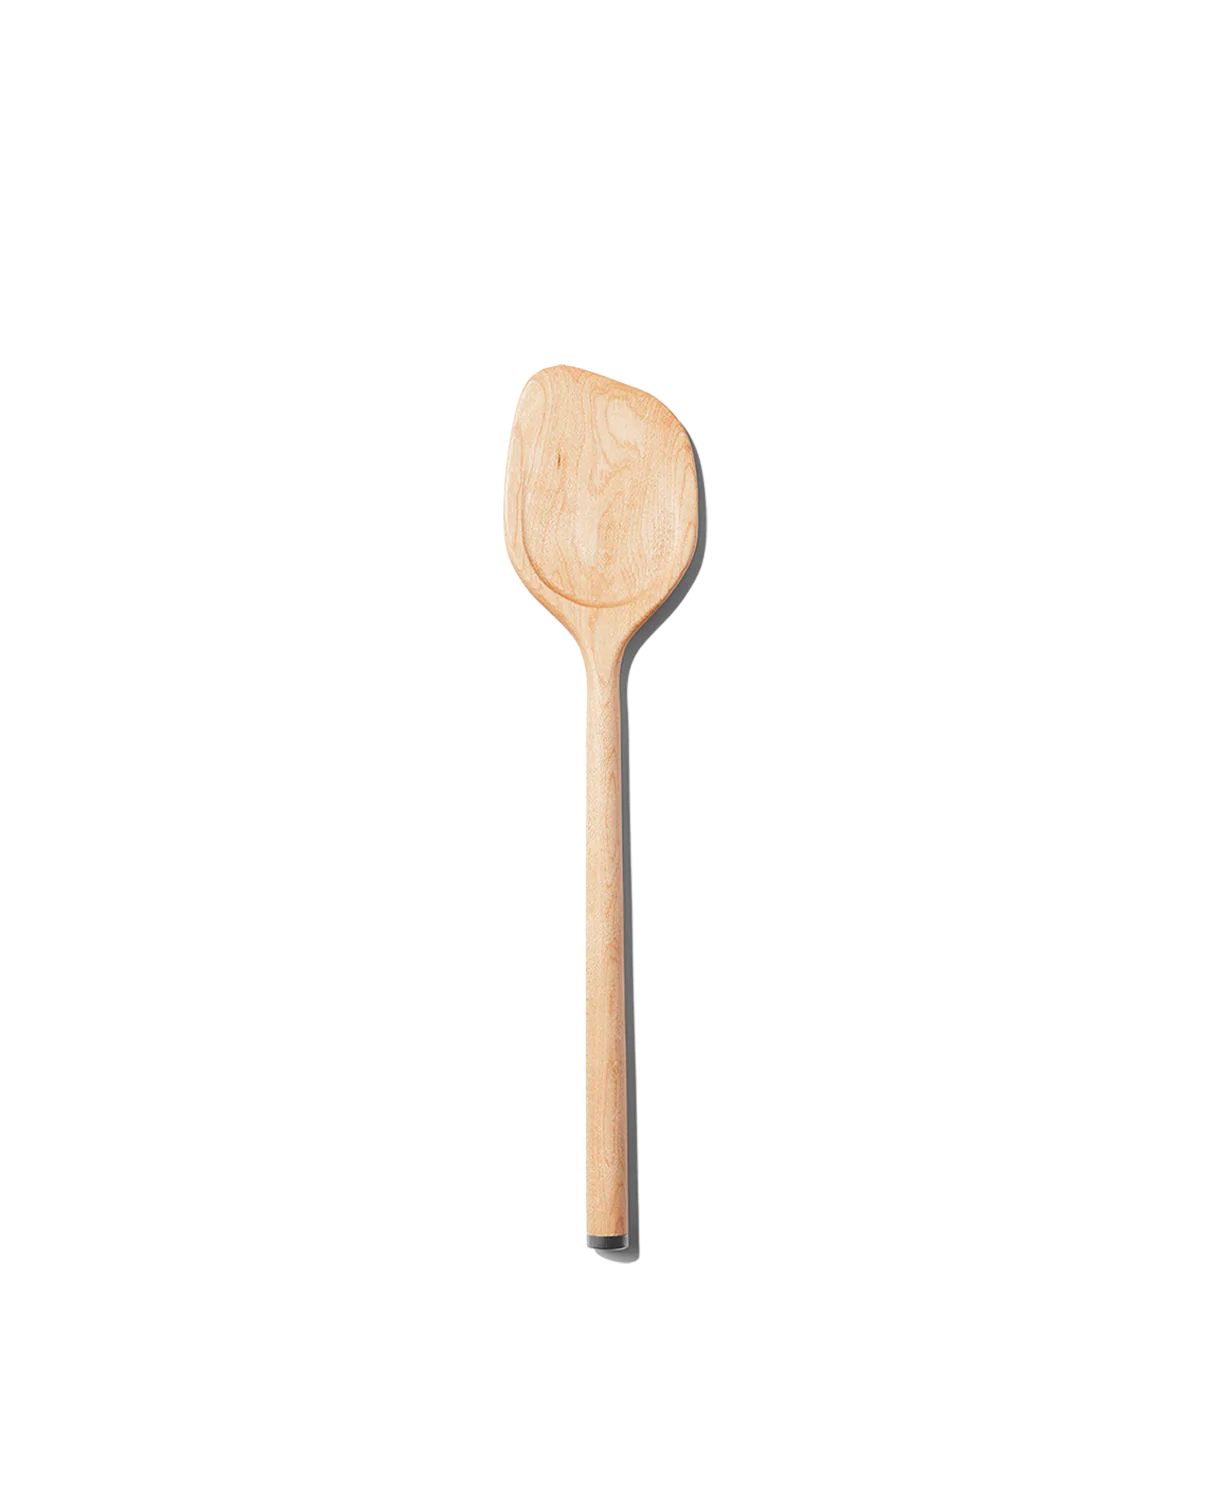 The Wood Spoon | Material